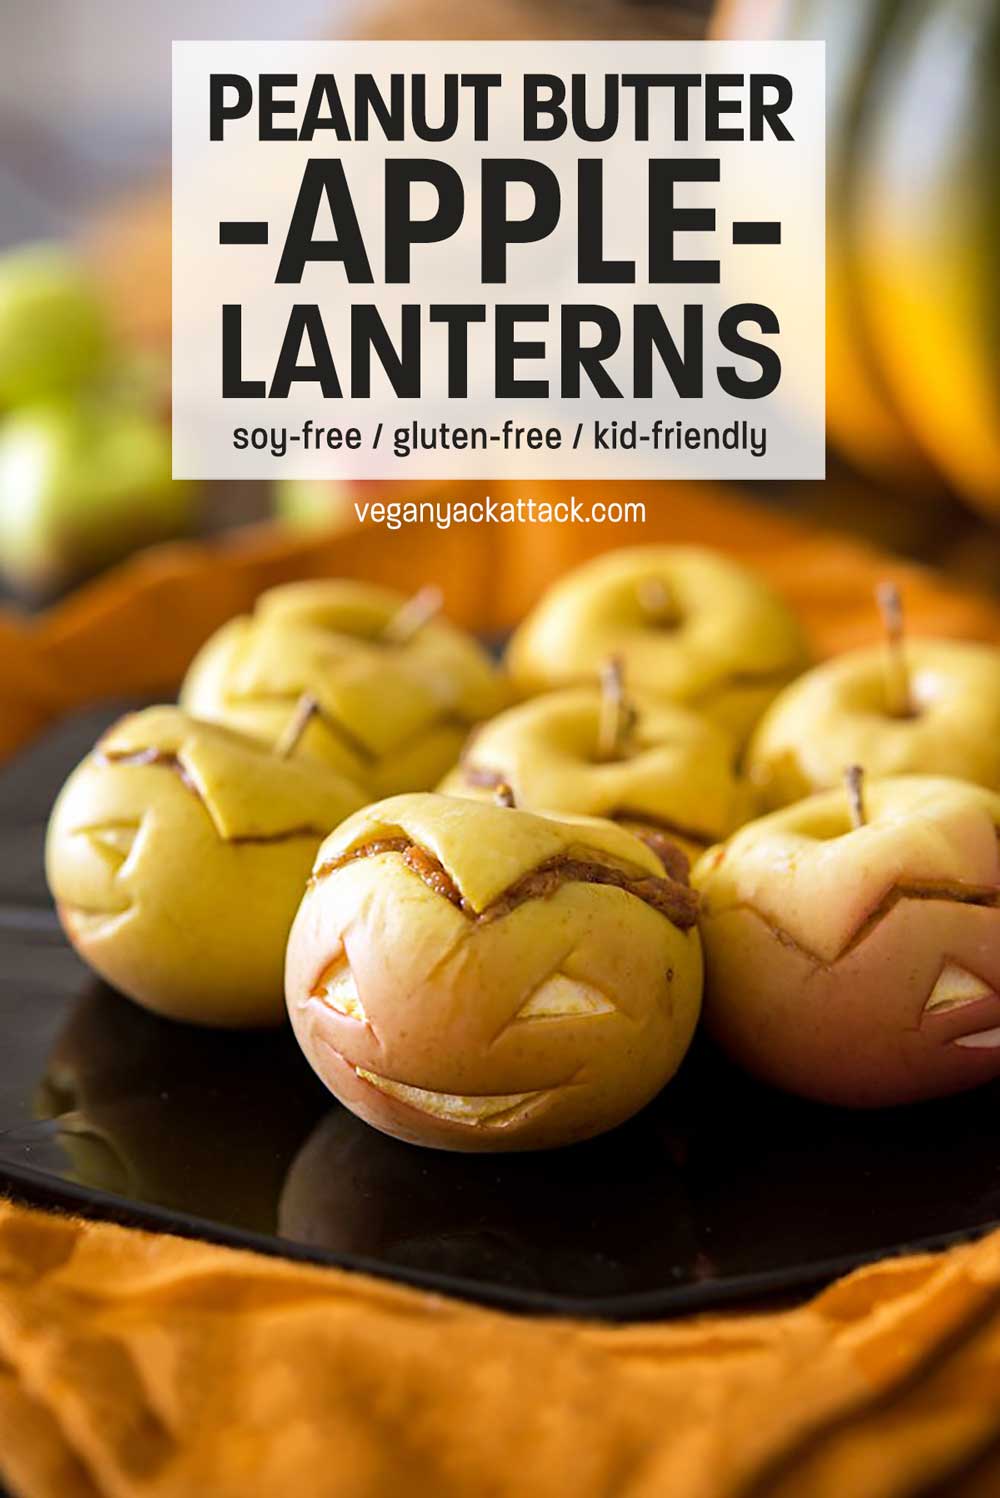 Close up of peanut butter-stuffed apples with faces and text reading "Peanut Butter Apple-Lanterns"